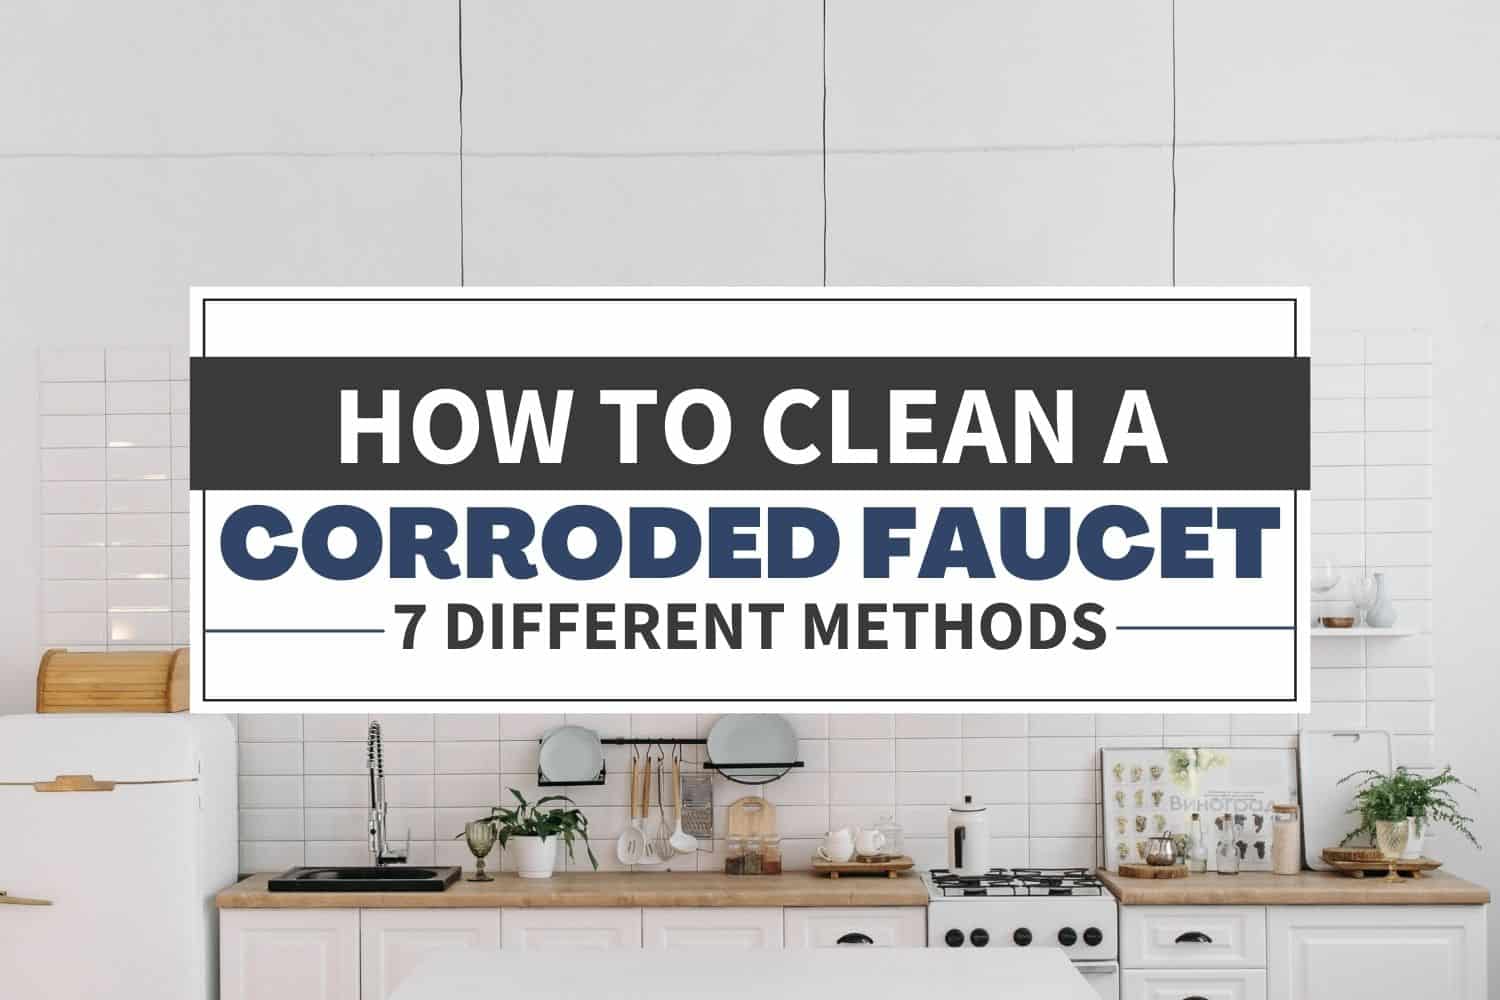 How to clean a corroded faucet: 7 different methods